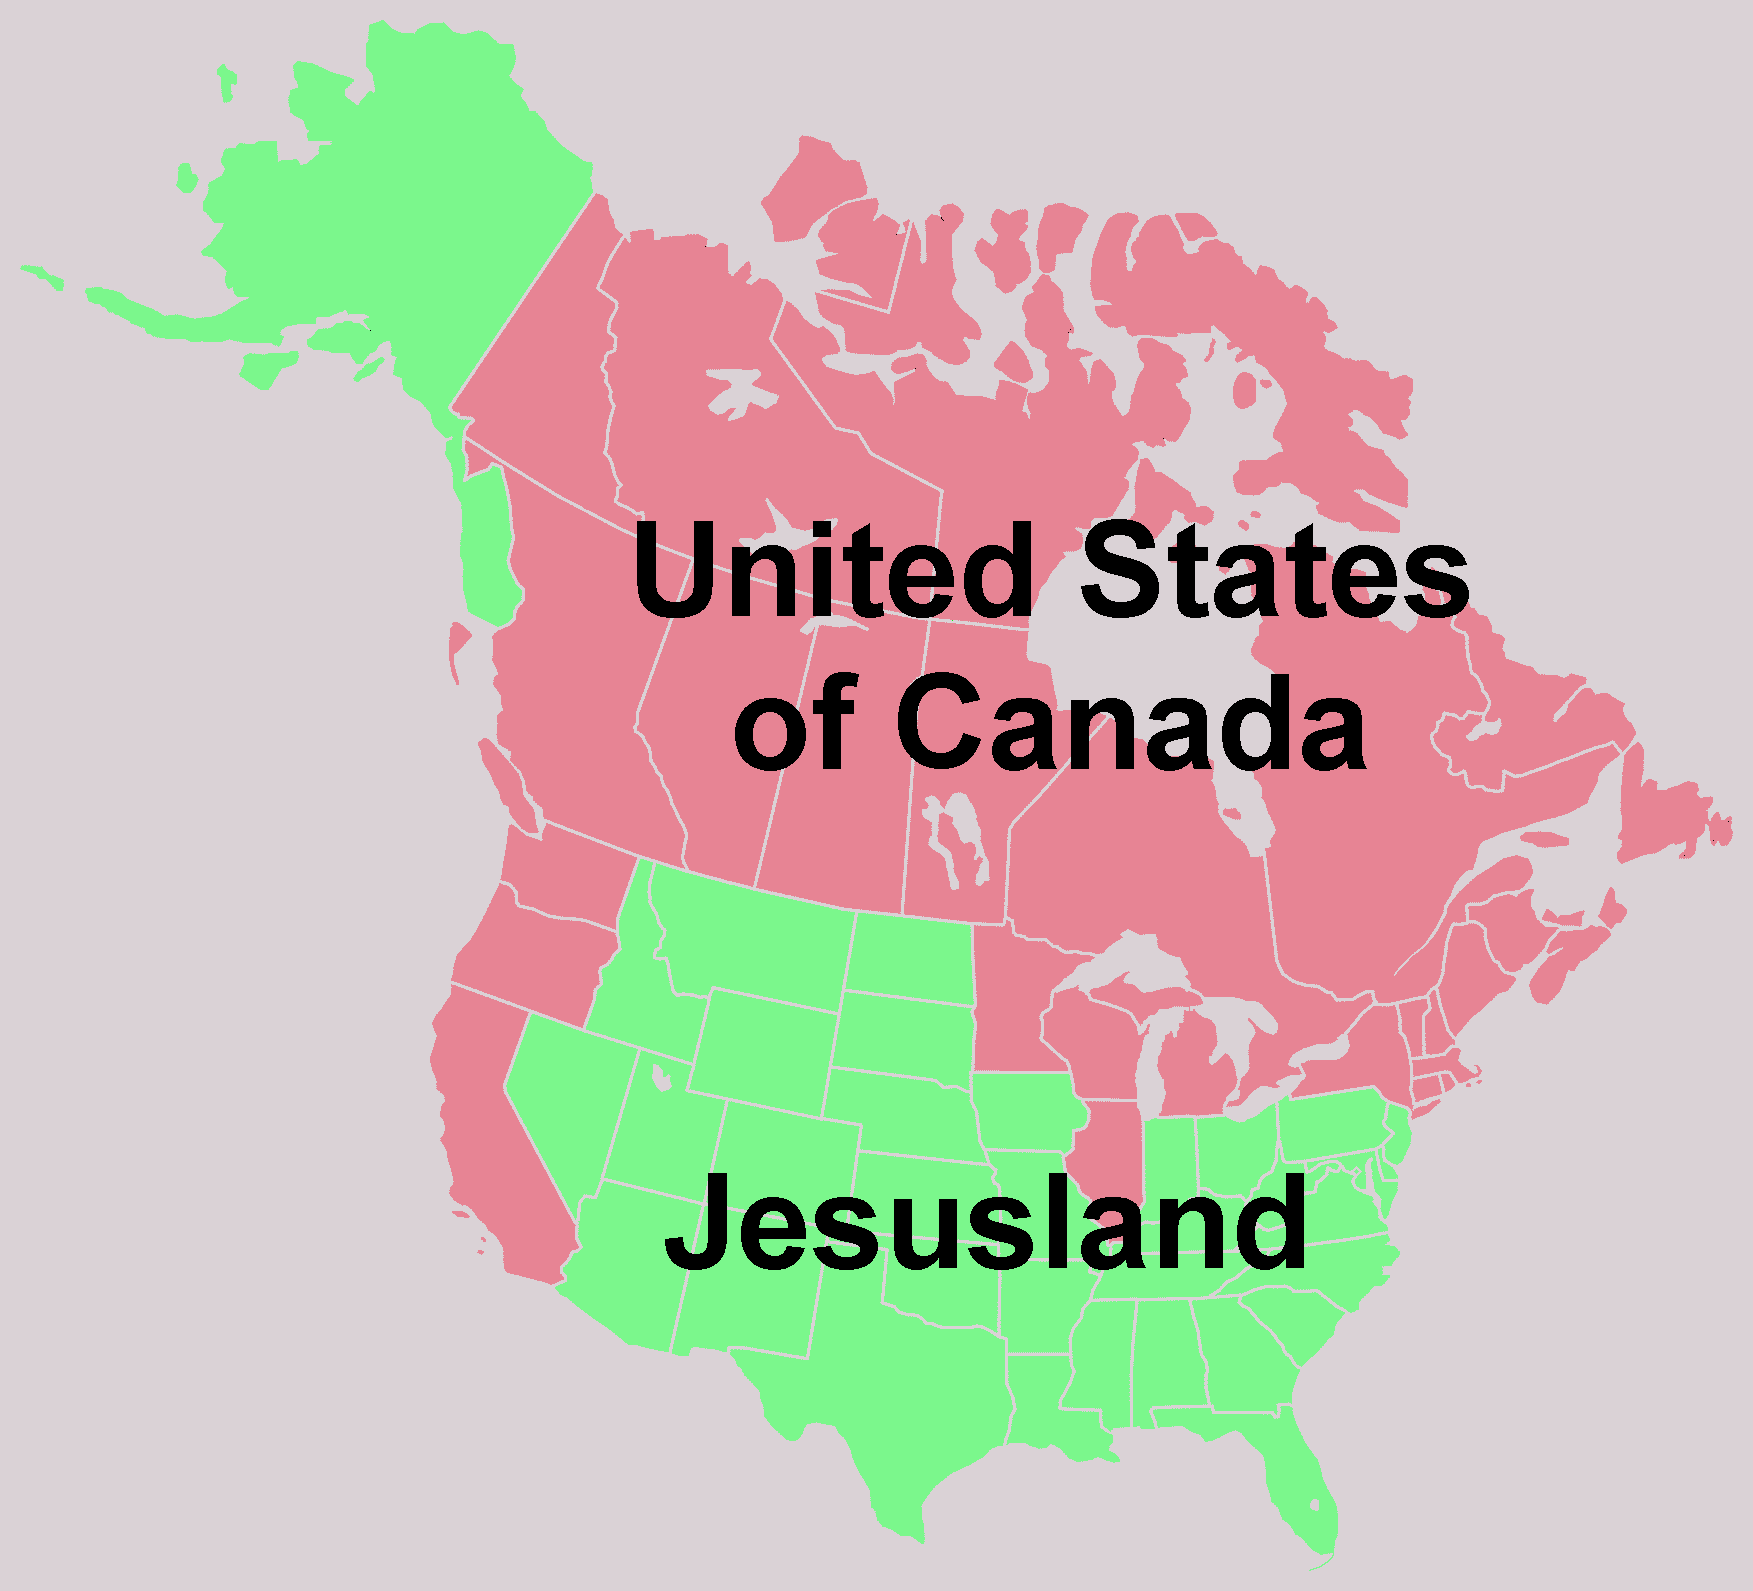 The first Jesusland map, predictor of the Great Sortation